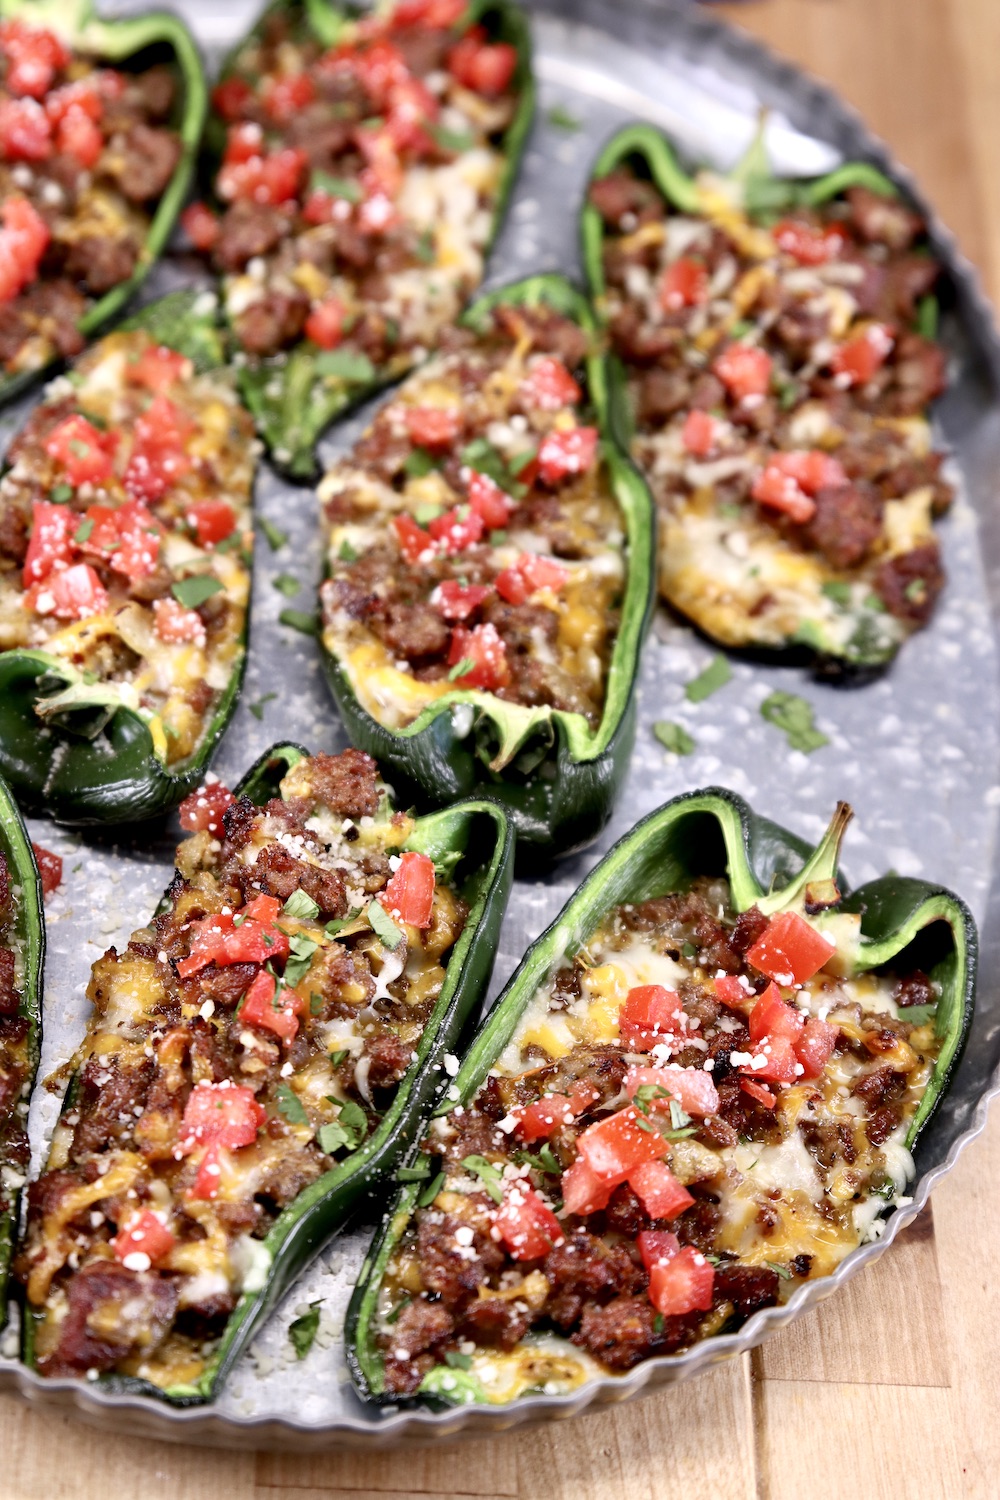 Poblano peppers stuffed with sausage and cheese topped with tomatoes